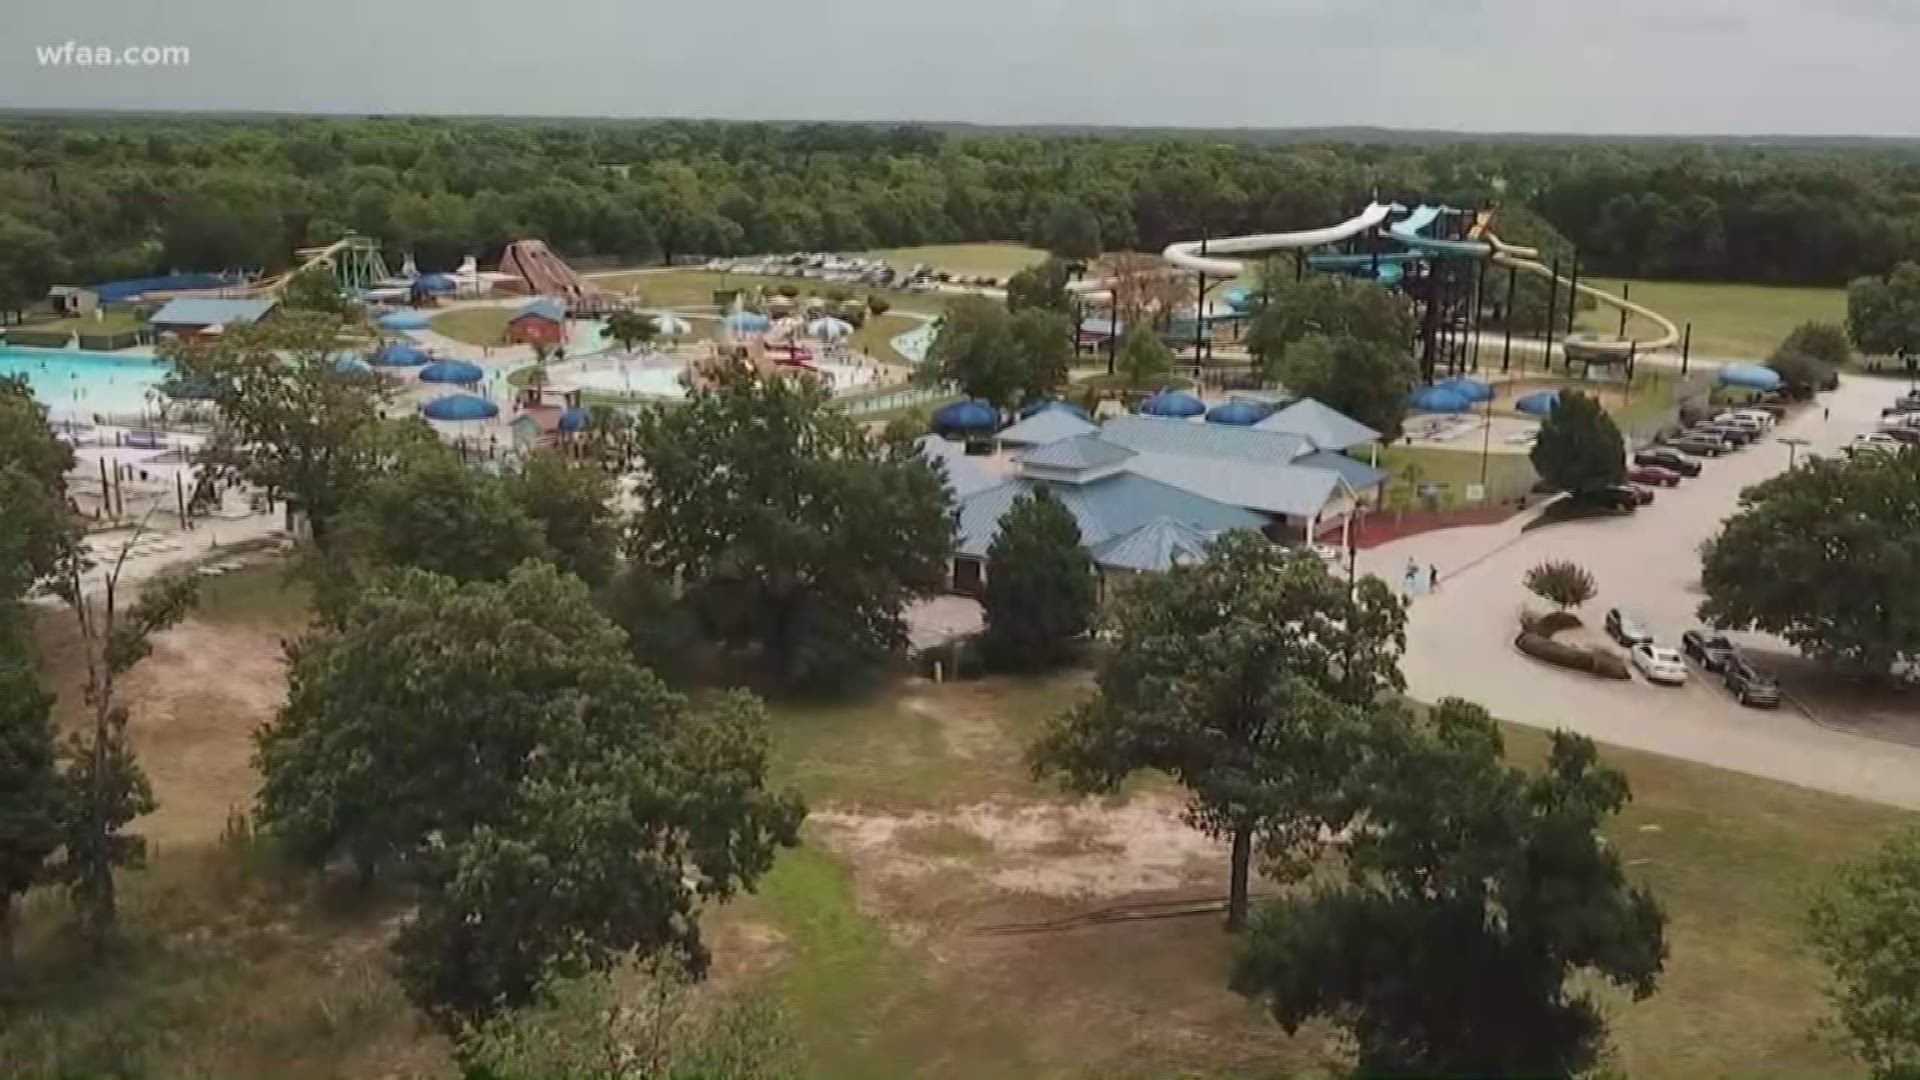 The Canton Fire Department responded to Splash Kingdom Waterpark around 5 p.m. Sunday for a reported drowning.